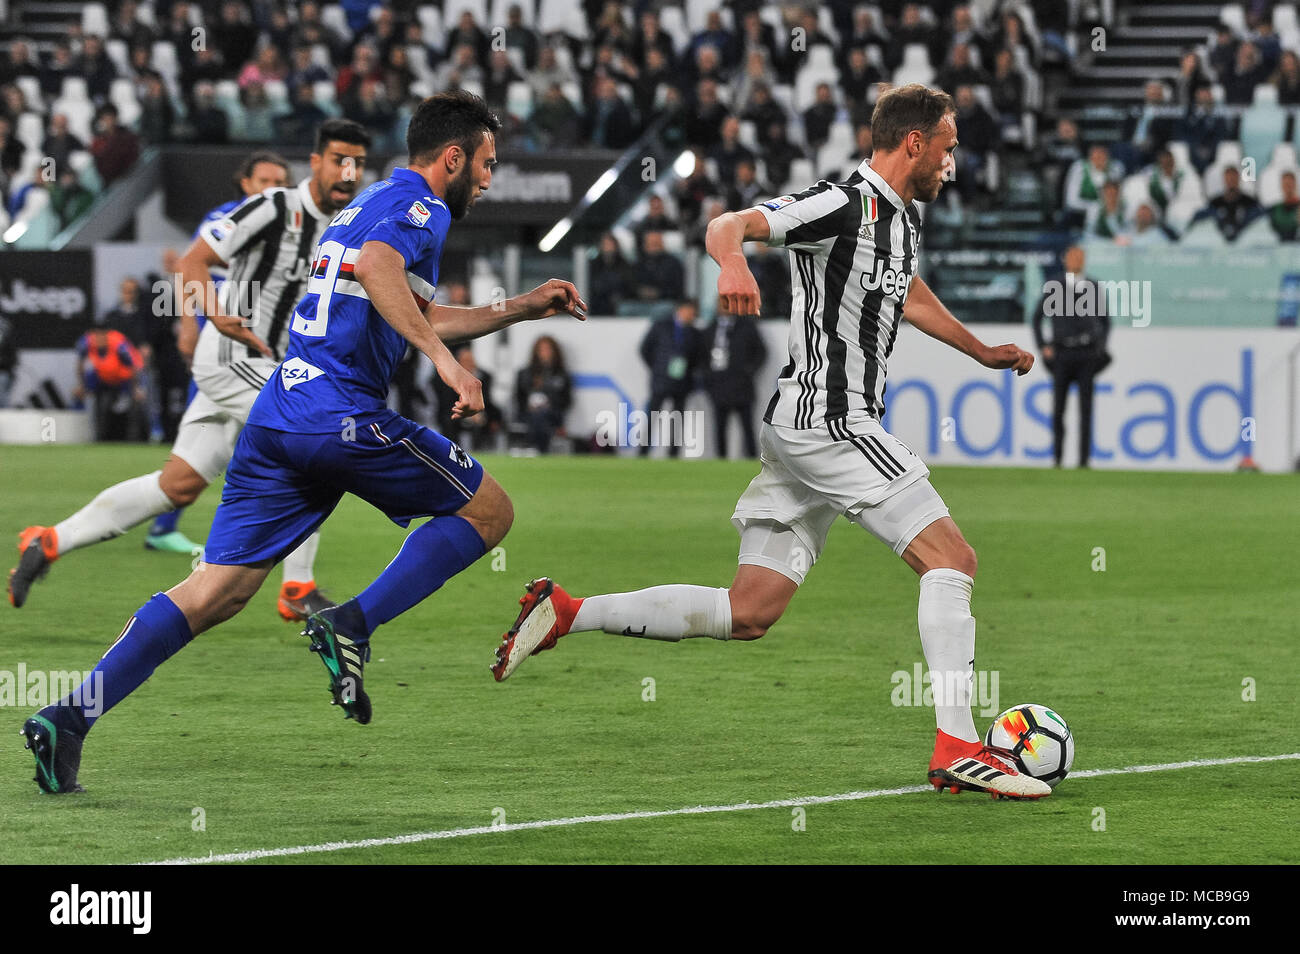 Around Turin - Full-Time: Juventus U23 1-0 Cuneo. The B team won their  first official game in the Italian Cup Serie C. @khaledalnouss1